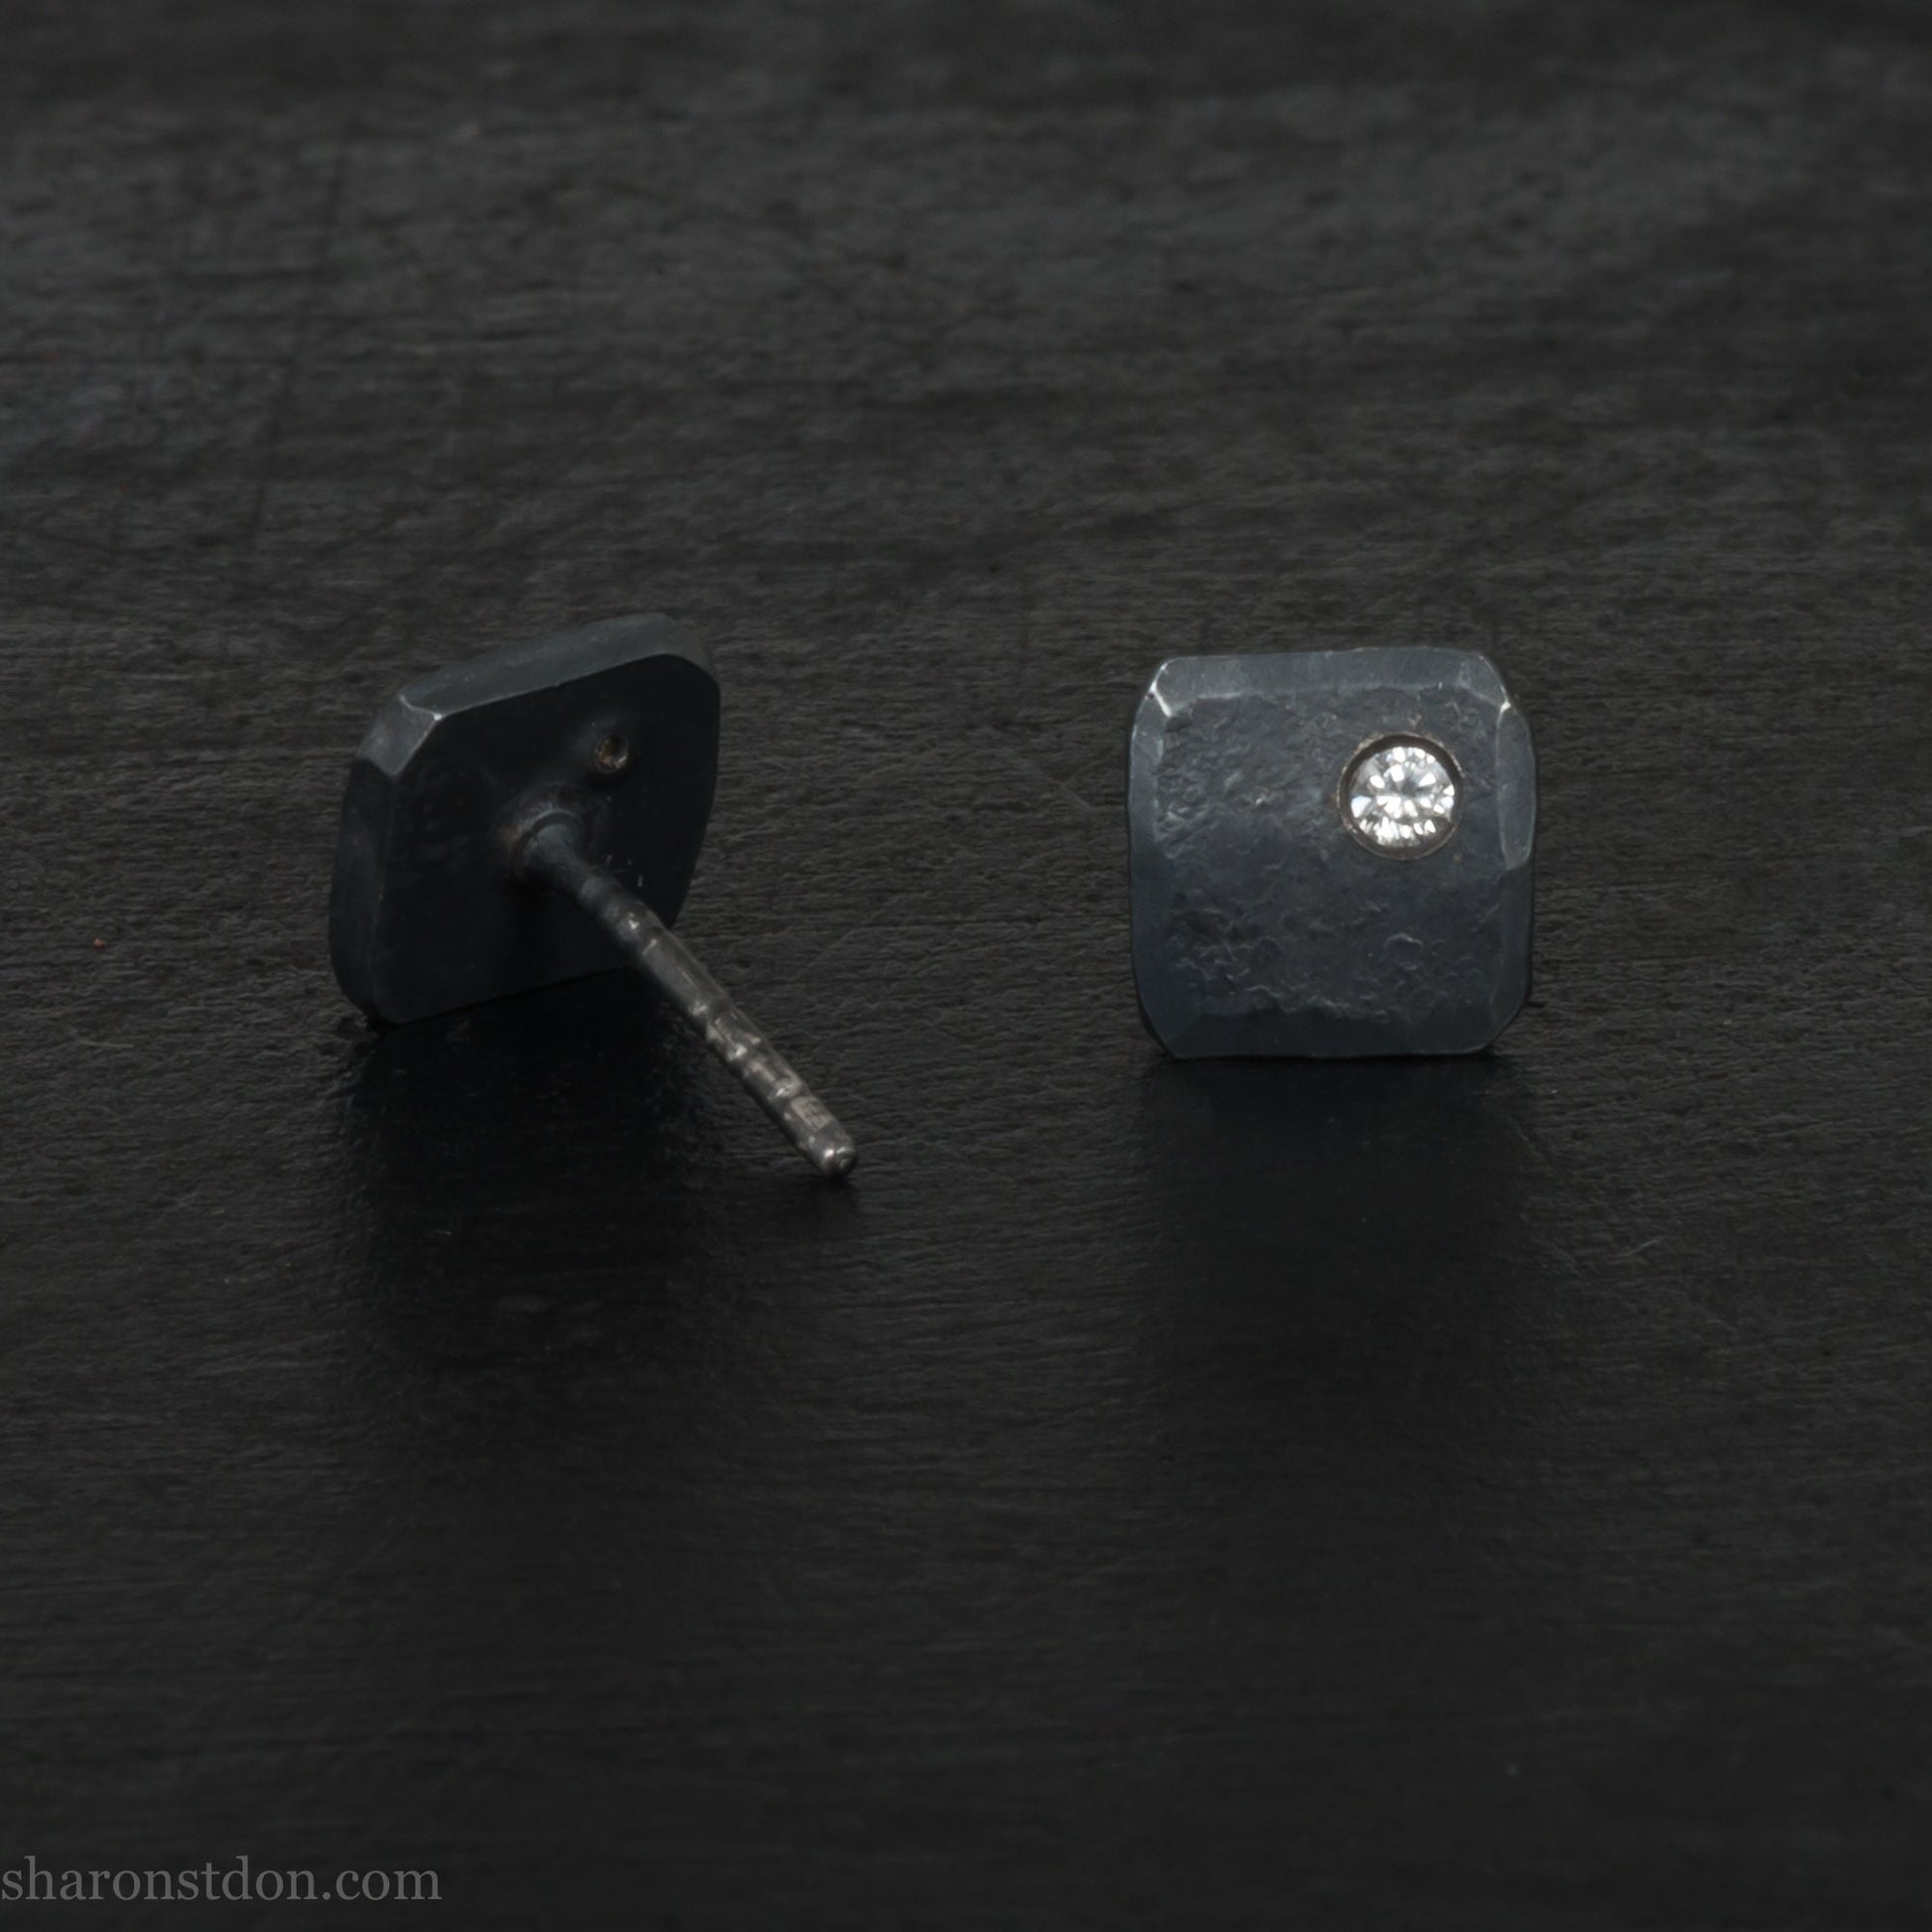 Handmade oxidized black 925 sterling silver stud earrings with cubic zirconia gemstone in the corner. Small 7mm x 7mm square stud earrings made by Sharon SaintDon in North America.